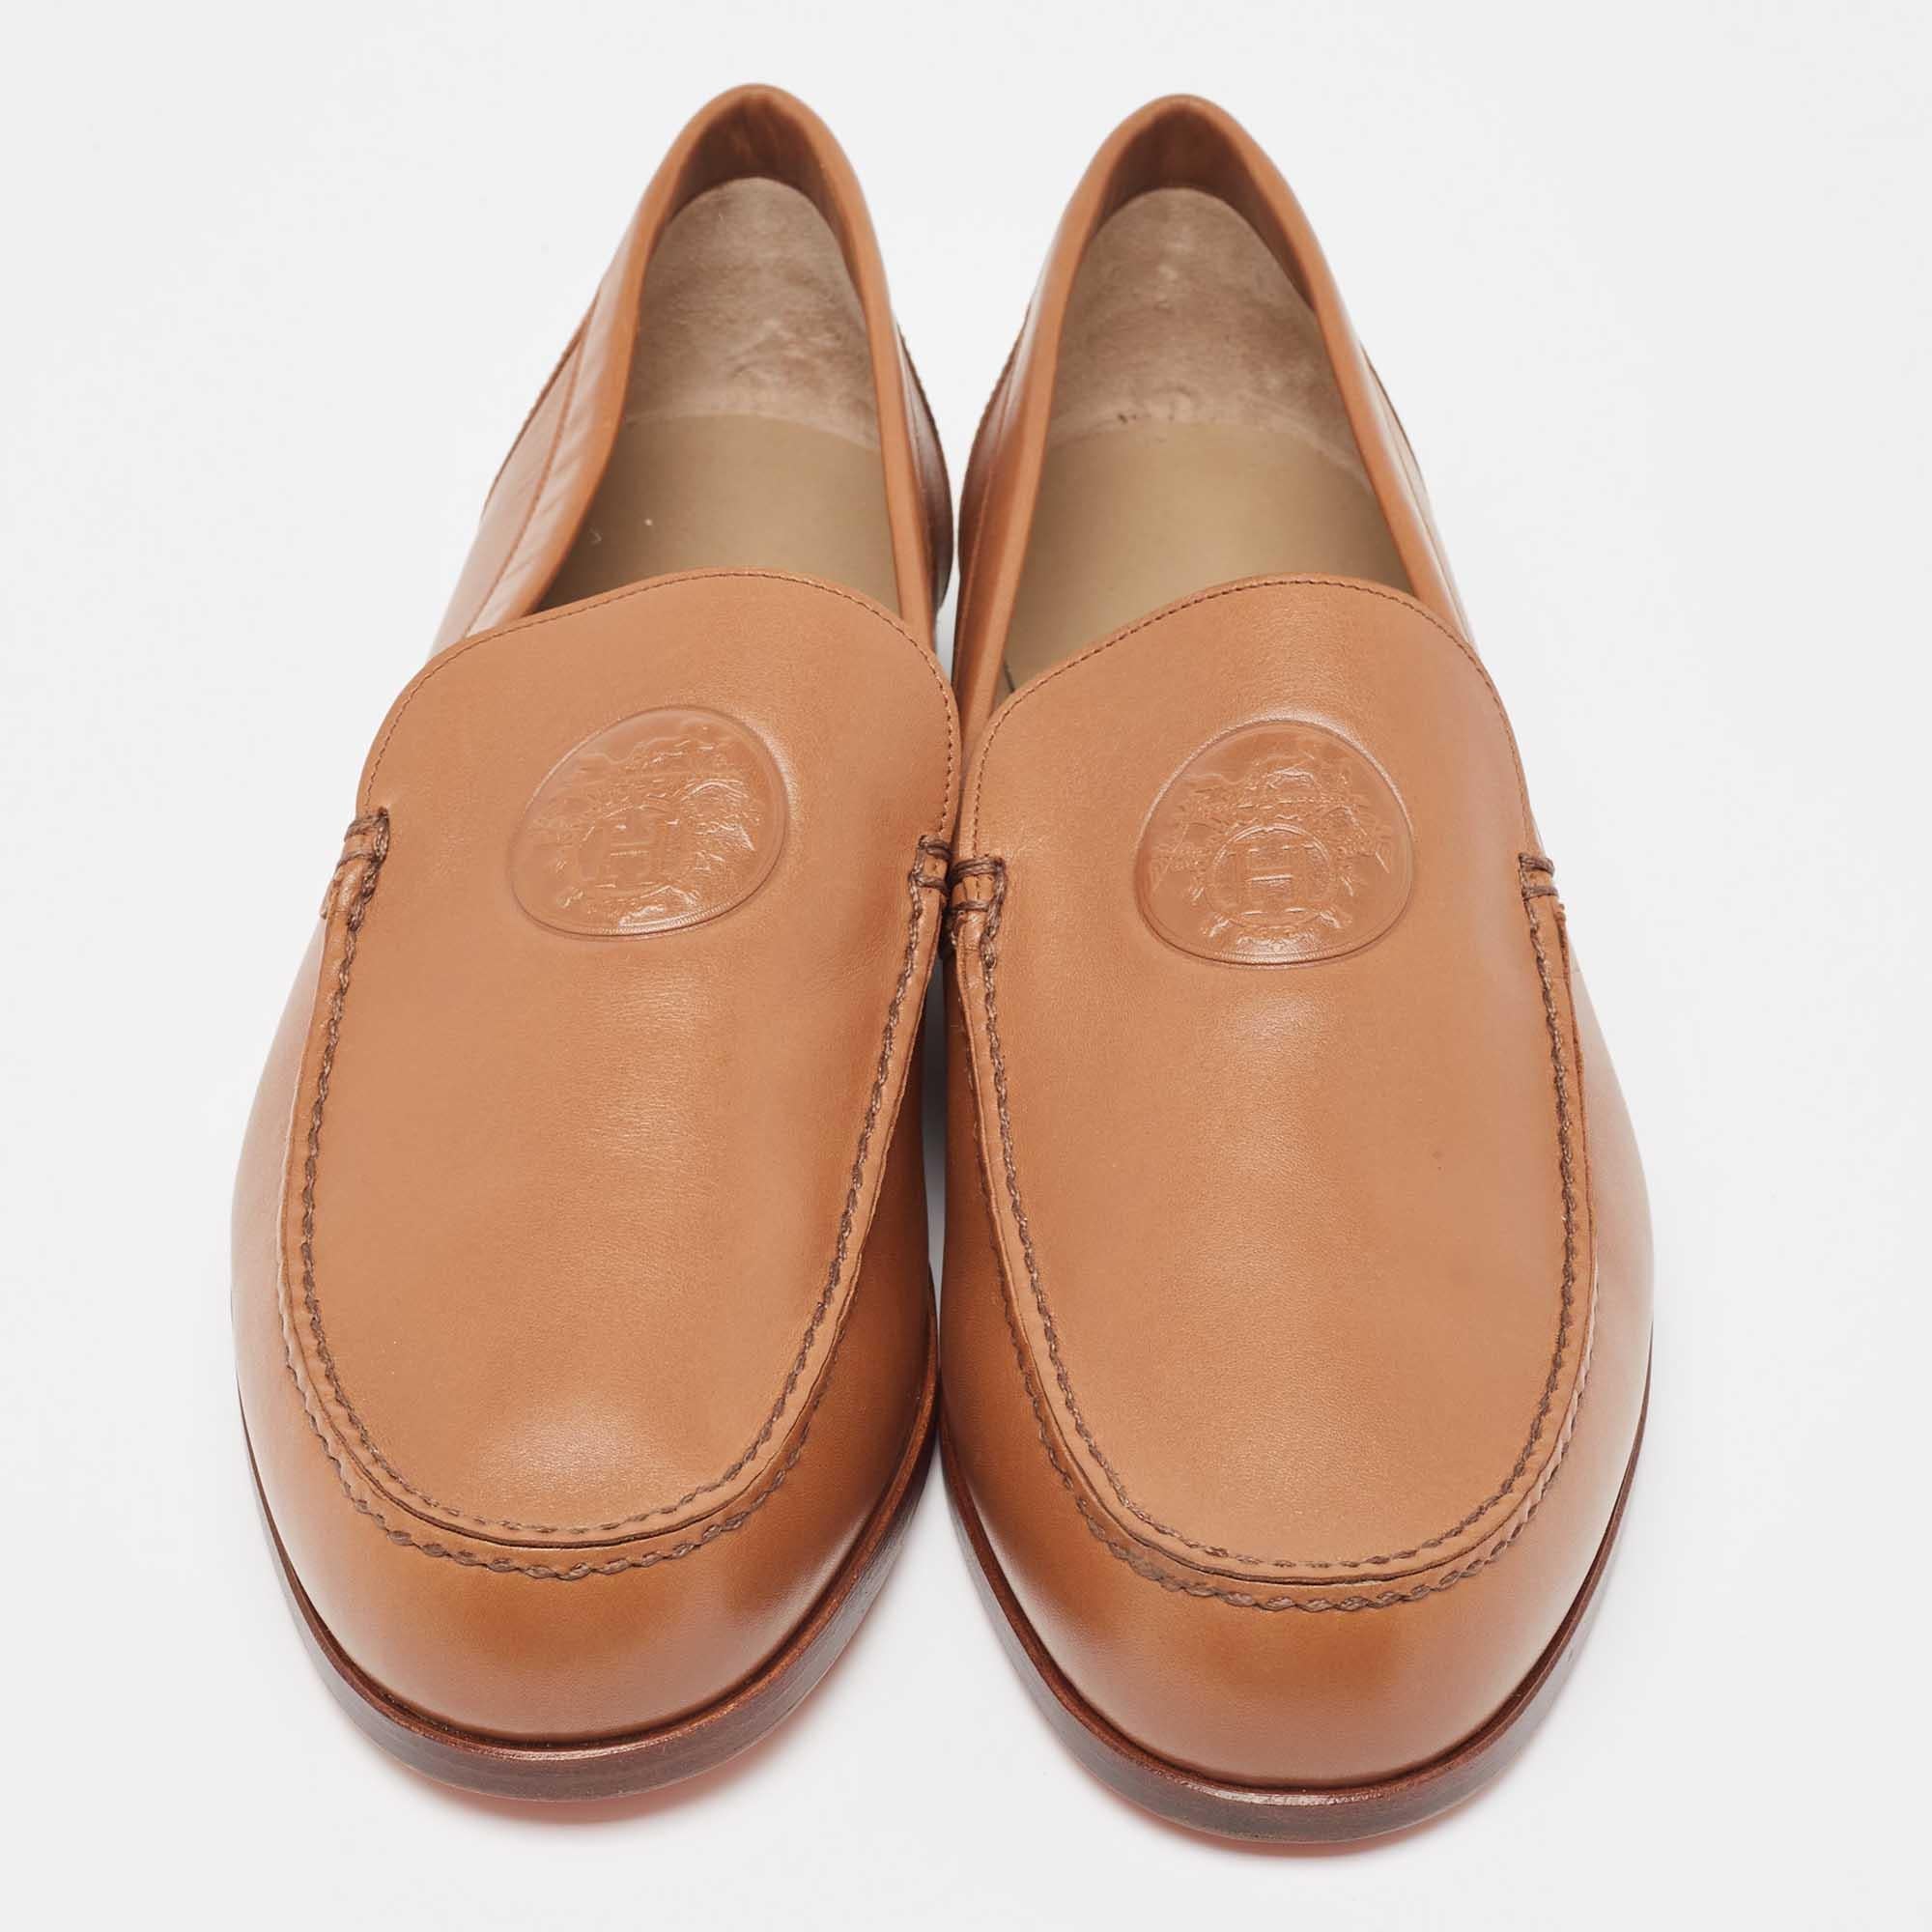 Hermès Brown Leather Slip On Loafers Size 44 1